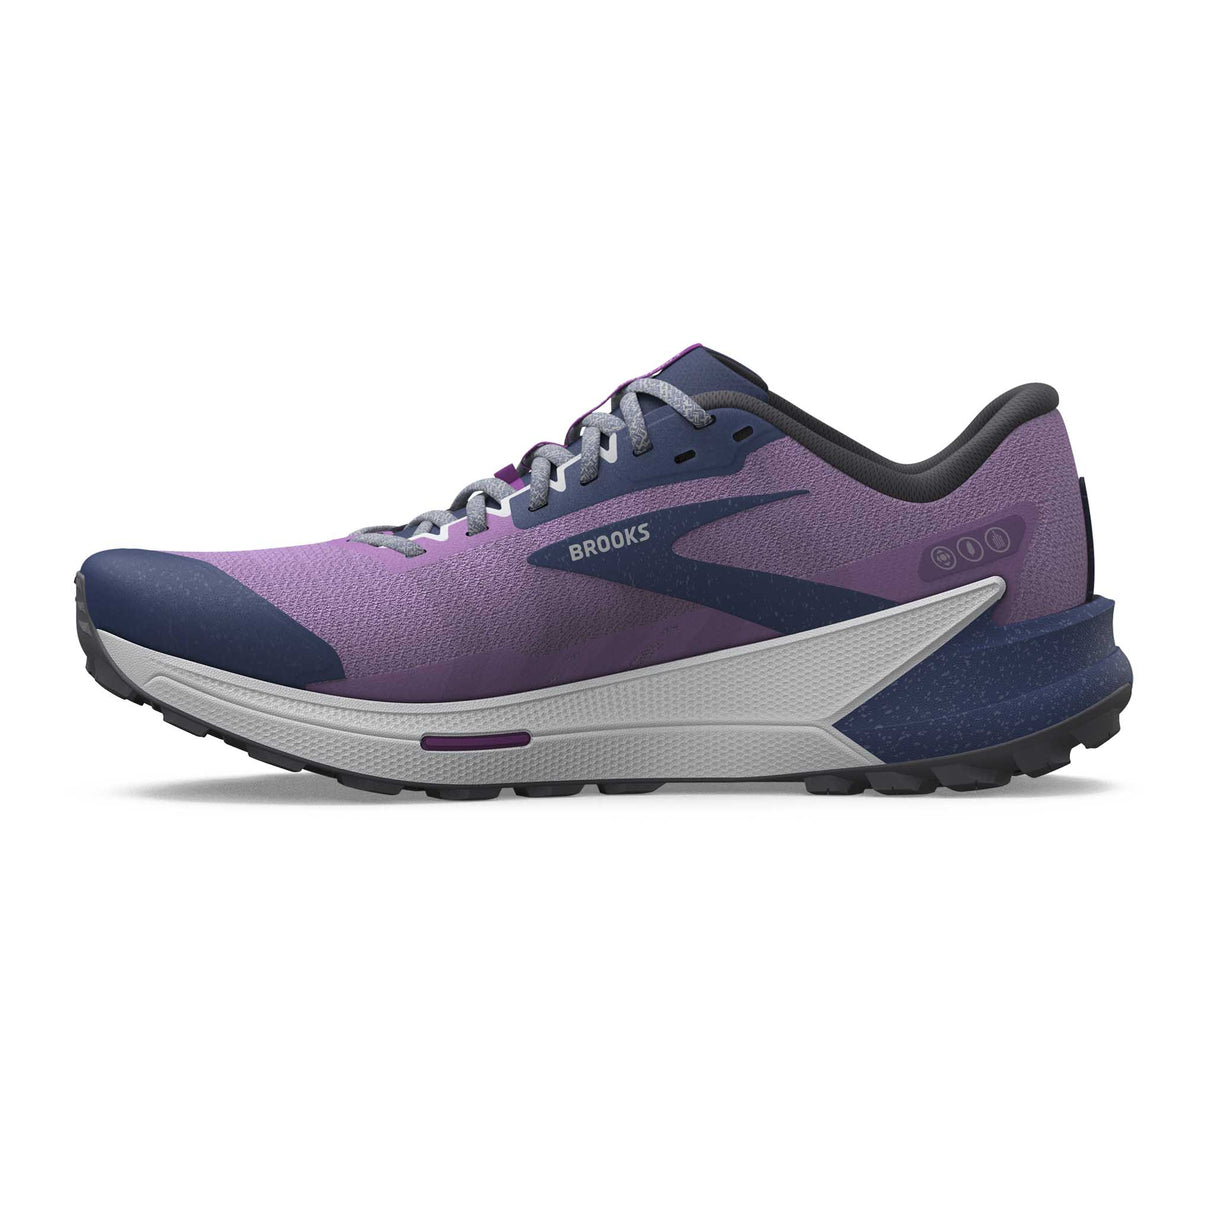 Brooks Catamount 2 chaussures de course à pied trail femme lateral- Violet / Navy / Oyster